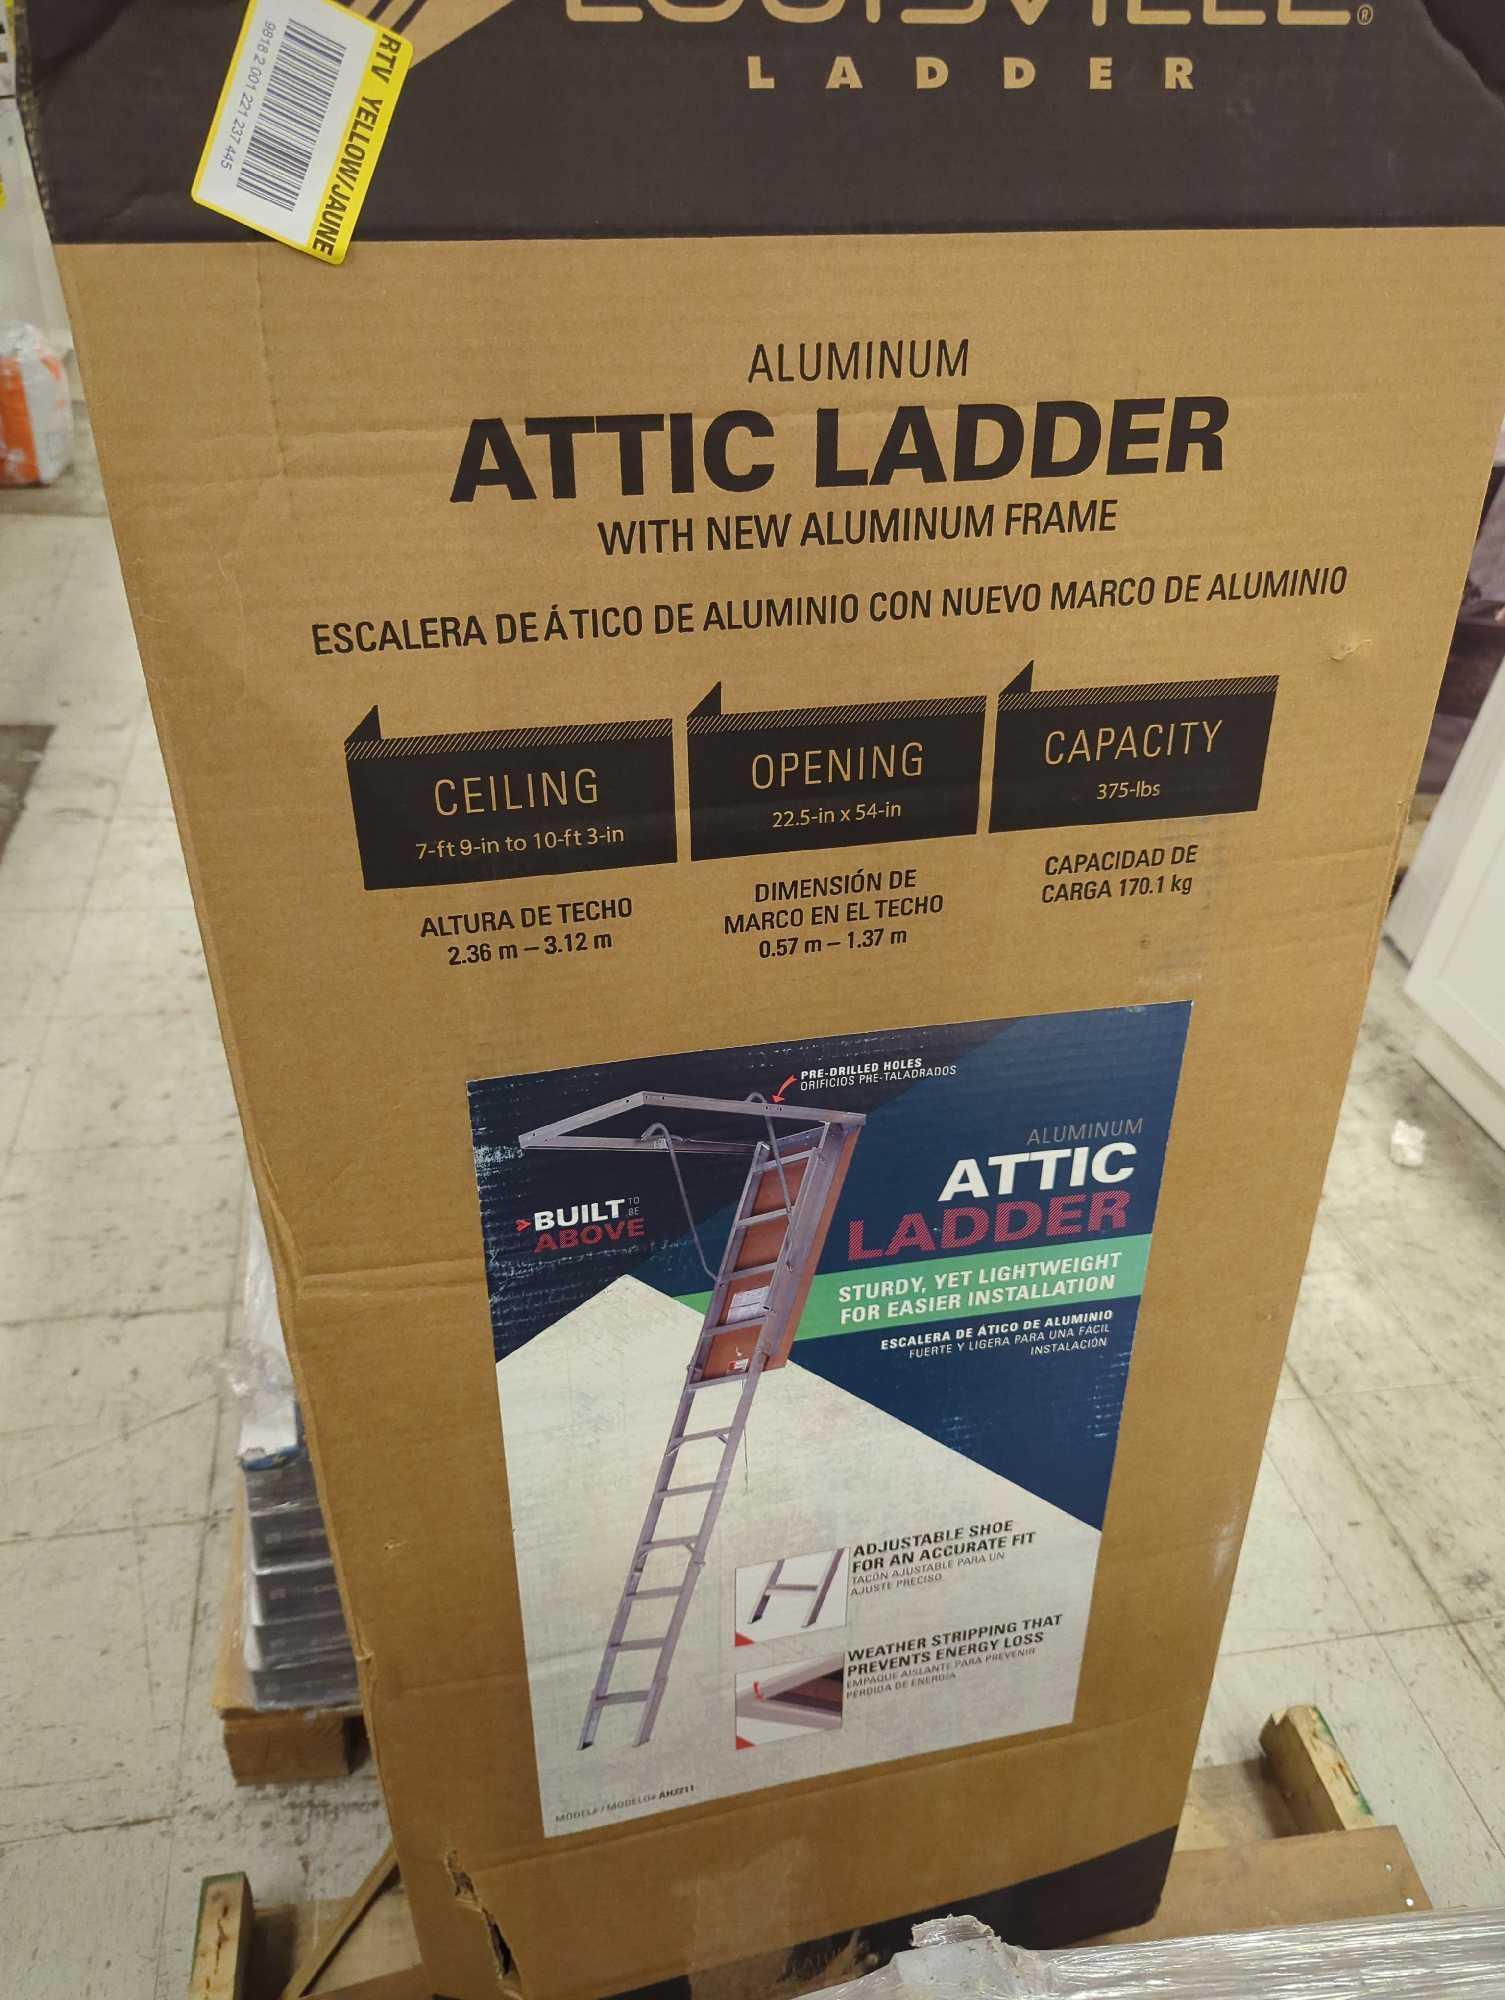 Louisville Ladder (7 ft.- 10 ft. Ceiling Height) Aluminum Attic Ladder (22.5 in. x 54 in. Rough